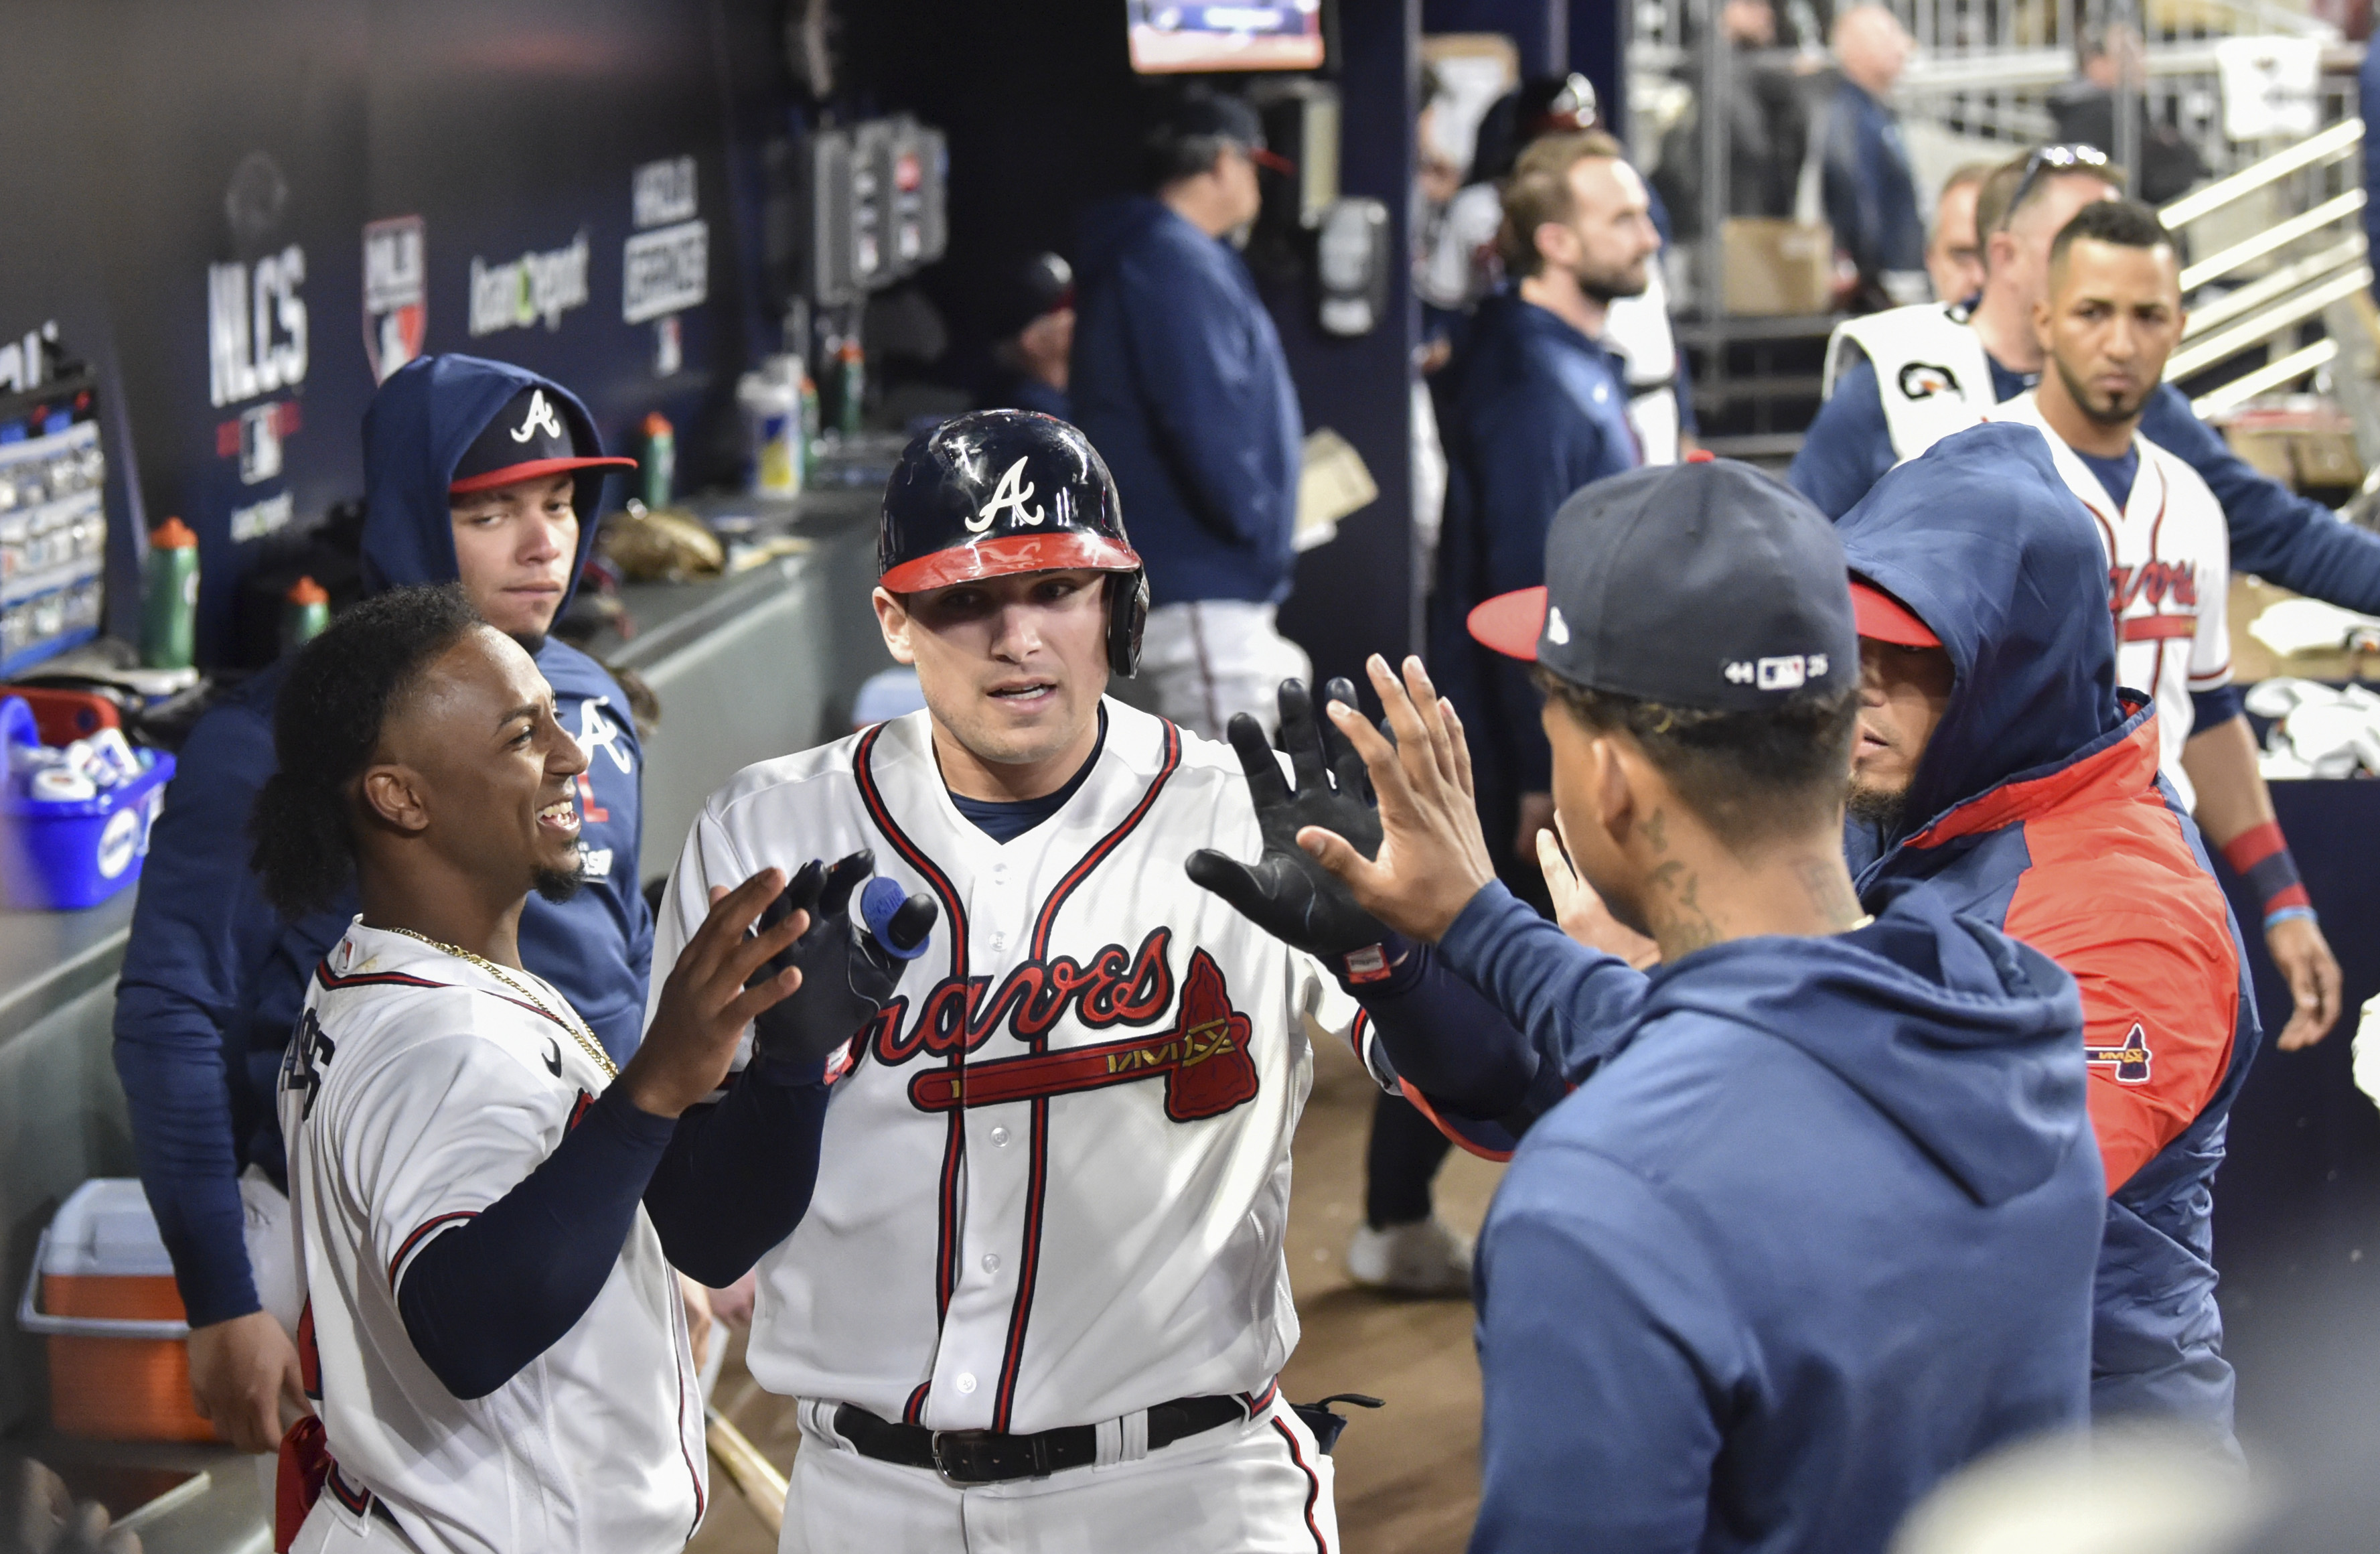 Riley's game-winning single in 9th lifts Braves past Dodgers